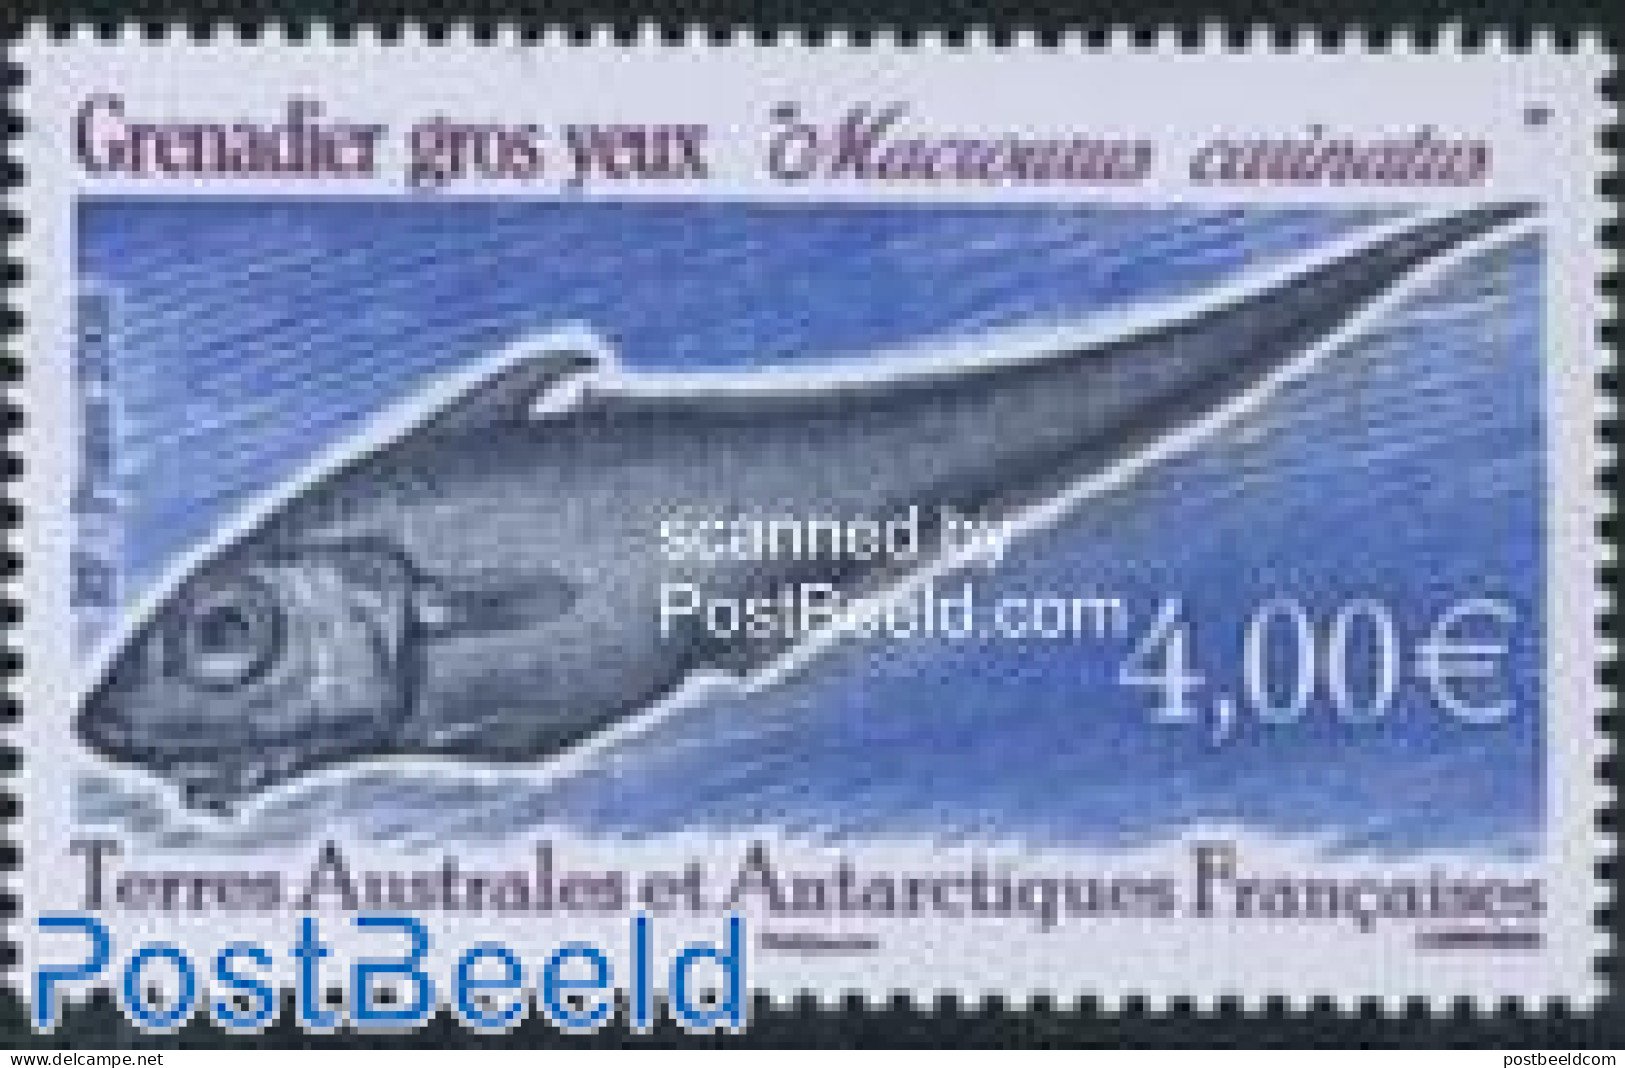 French Antarctic Territory 2008 Fish (Grenadier Gros Yeux) 1v, Mint NH, Nature - Fish - Unused Stamps